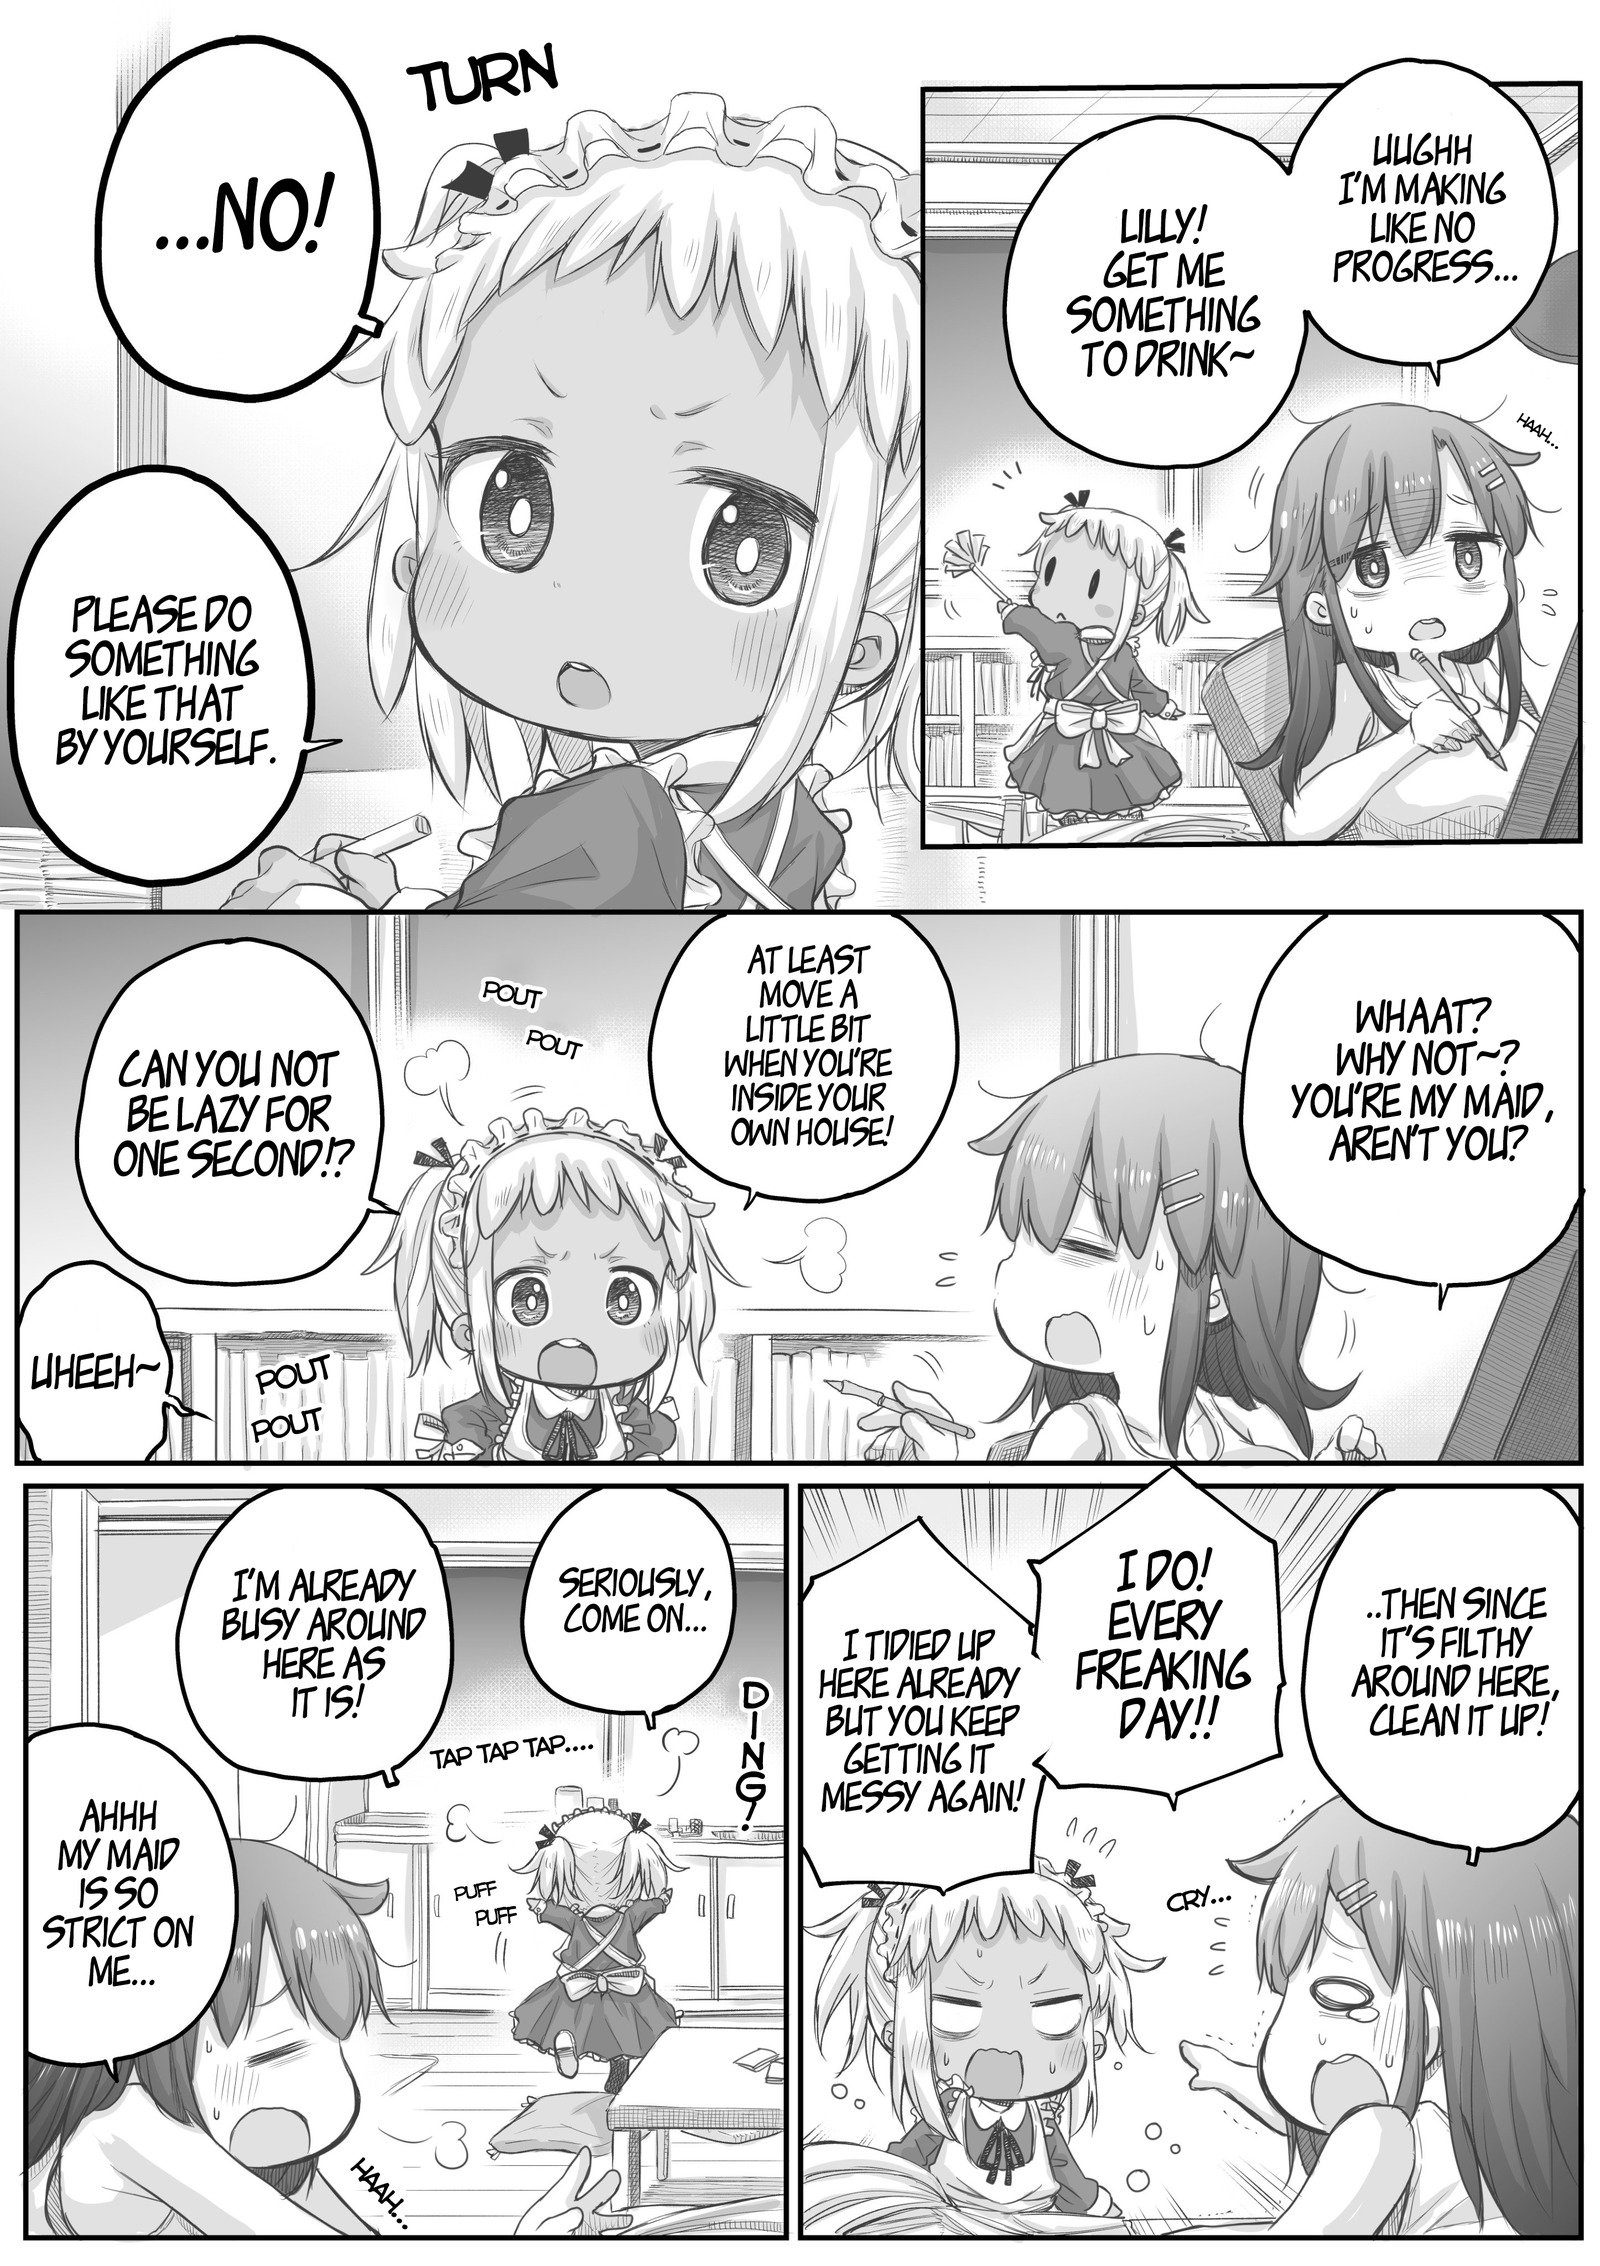 Ms. Corporate Slave Wants to be Healed by a Loli Spirit vol.1 ch.26